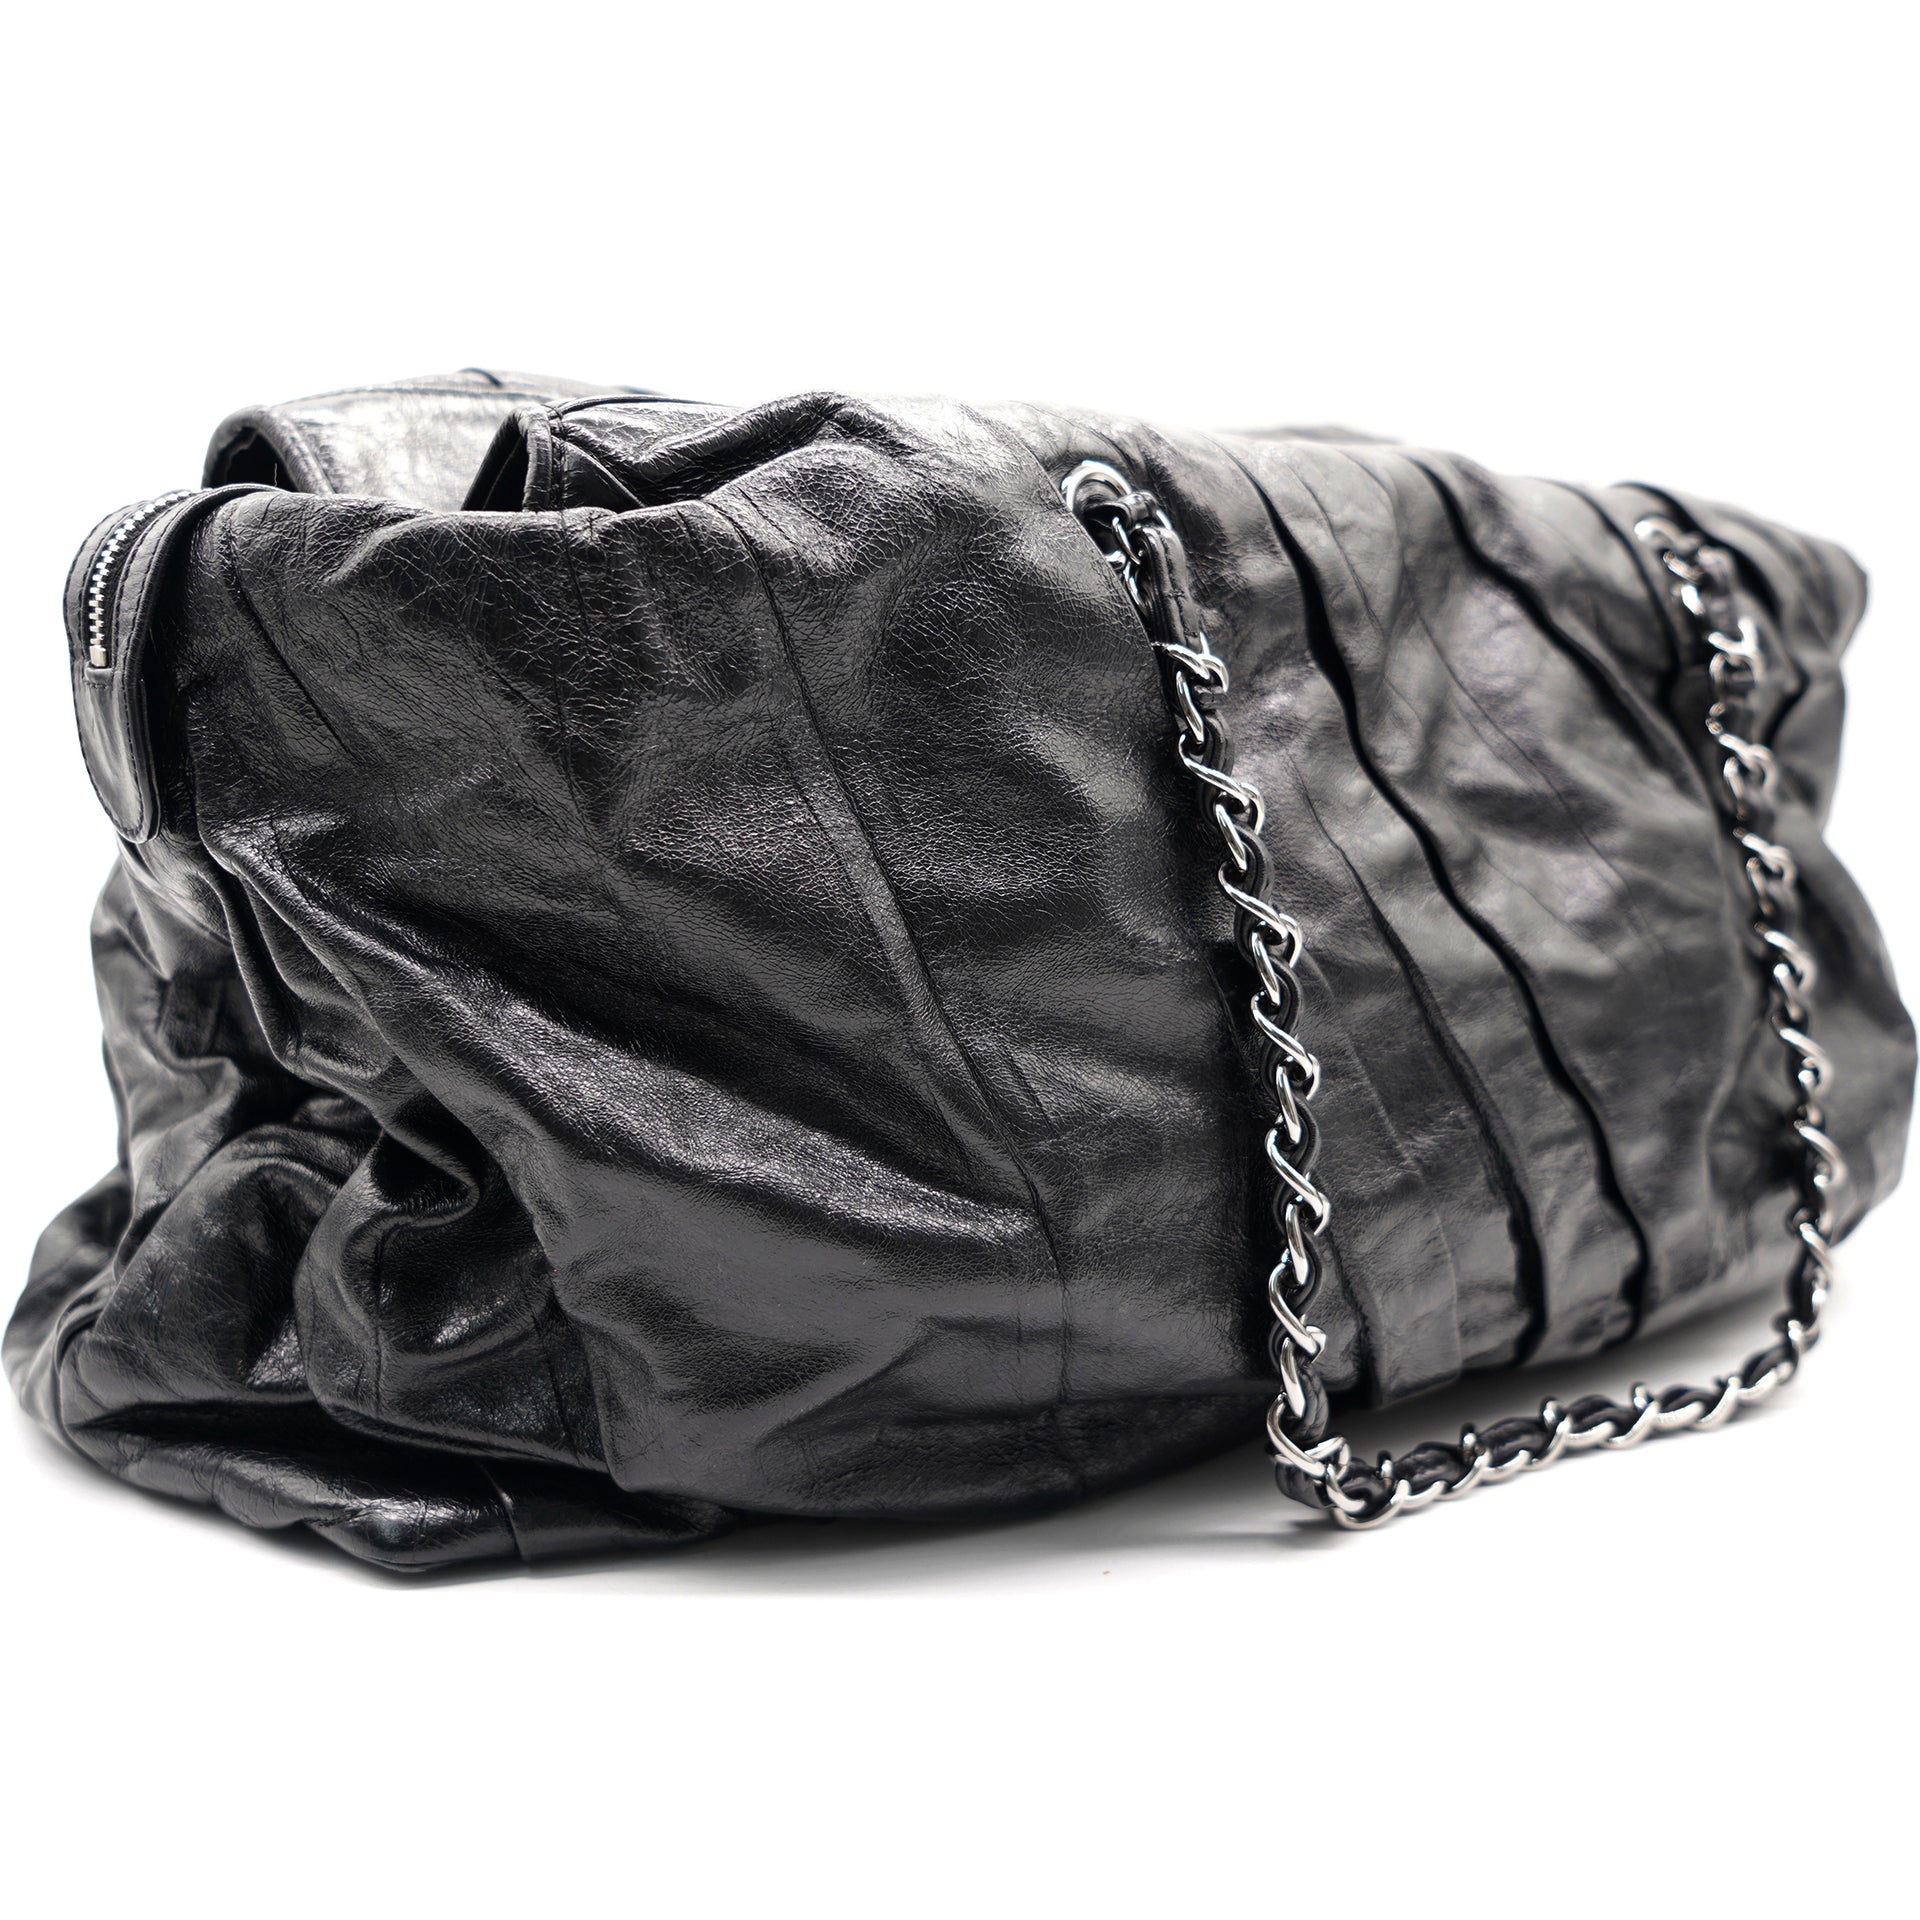 Chanel Black Glazed Chain Large Tote